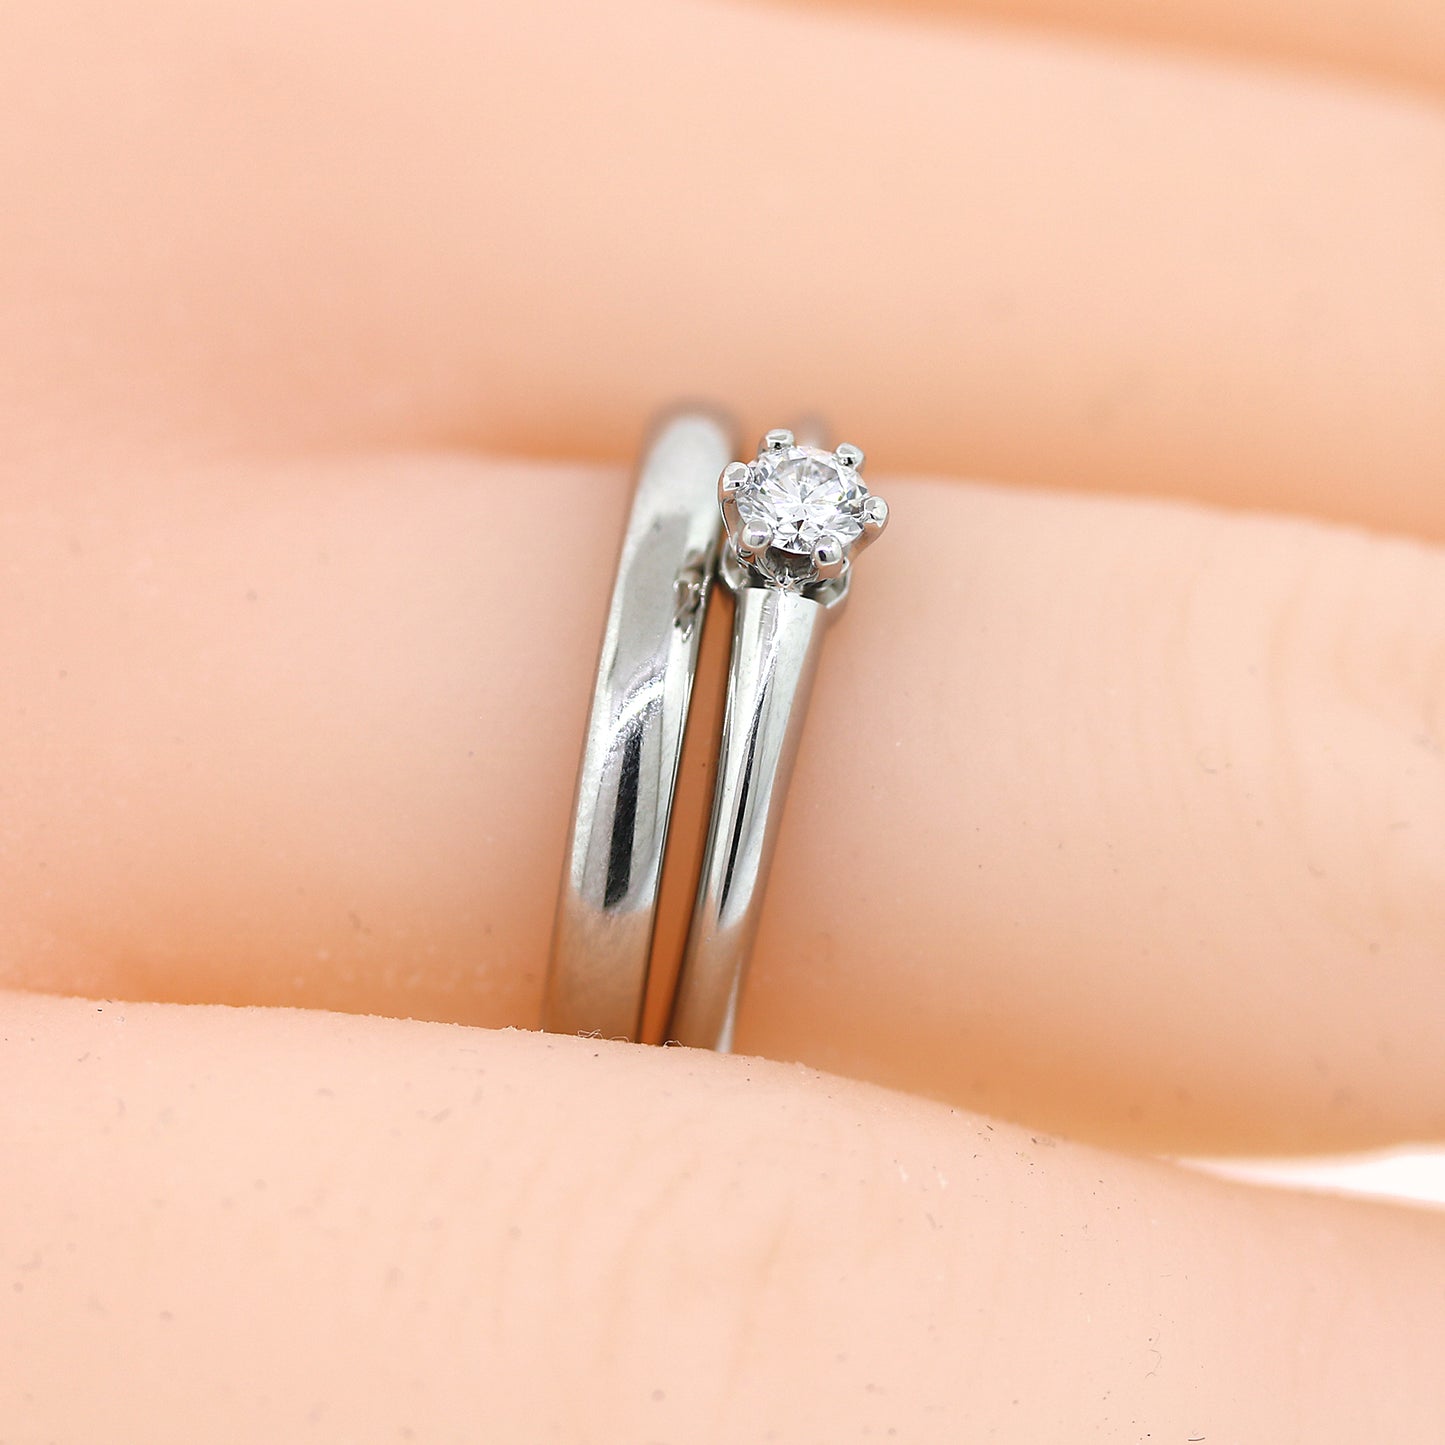 Tiffany and Co. Engagement and Wedding Rings Set in Platinum